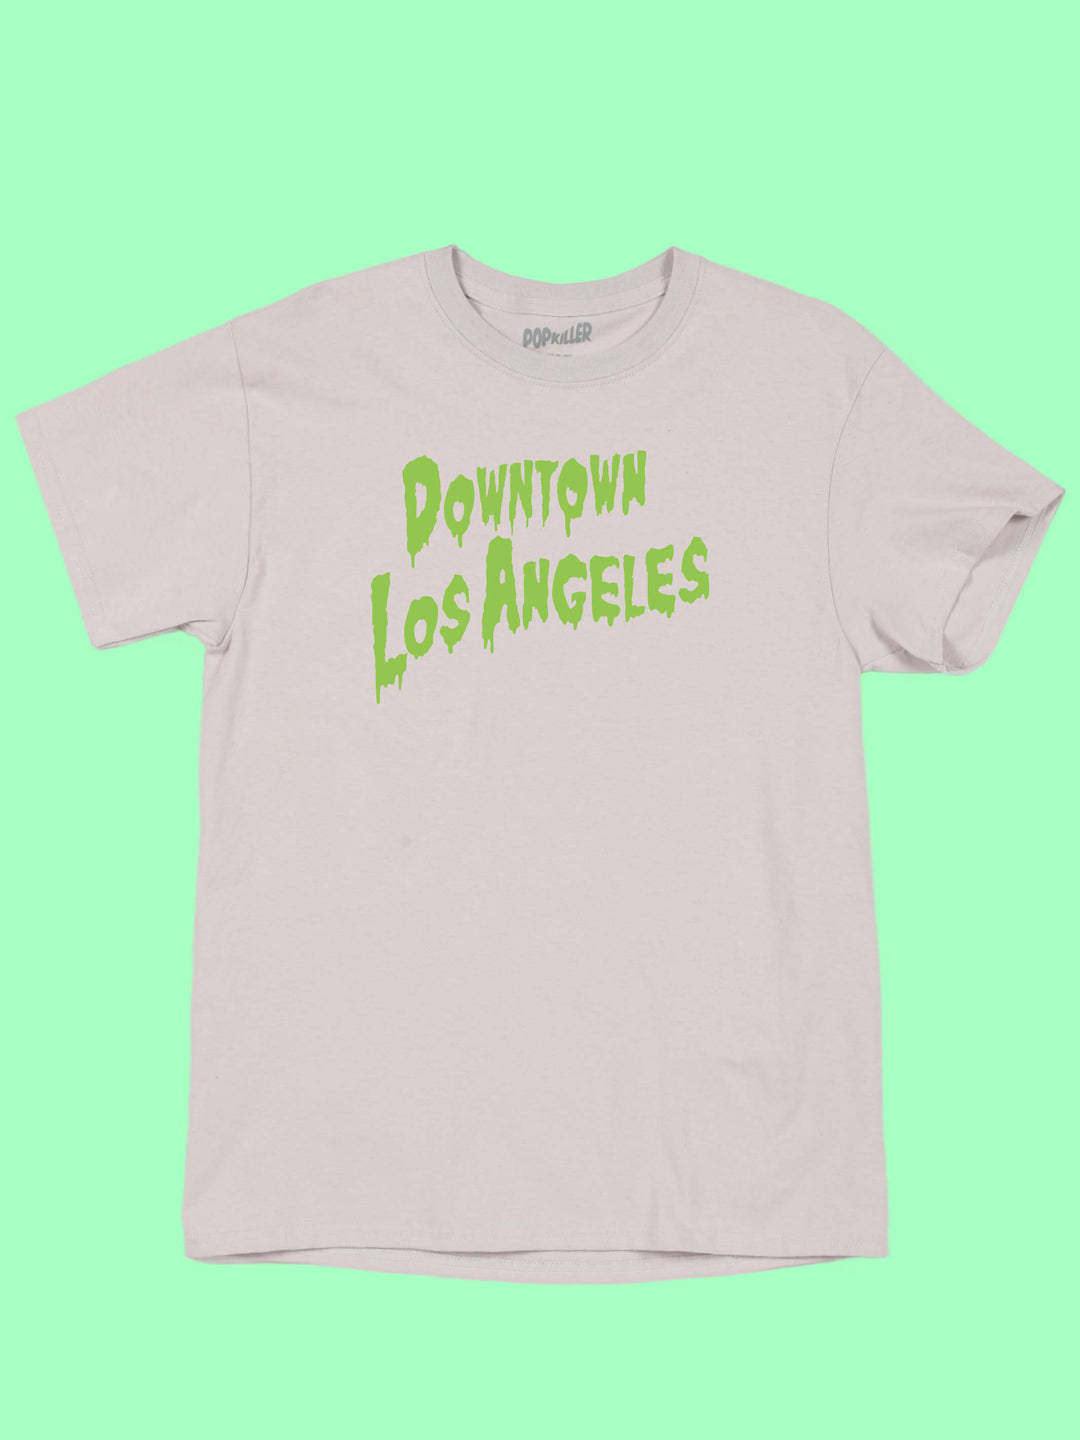 A grey t-shirt with the words 'Downtown Los Angeles' in a green horror font.